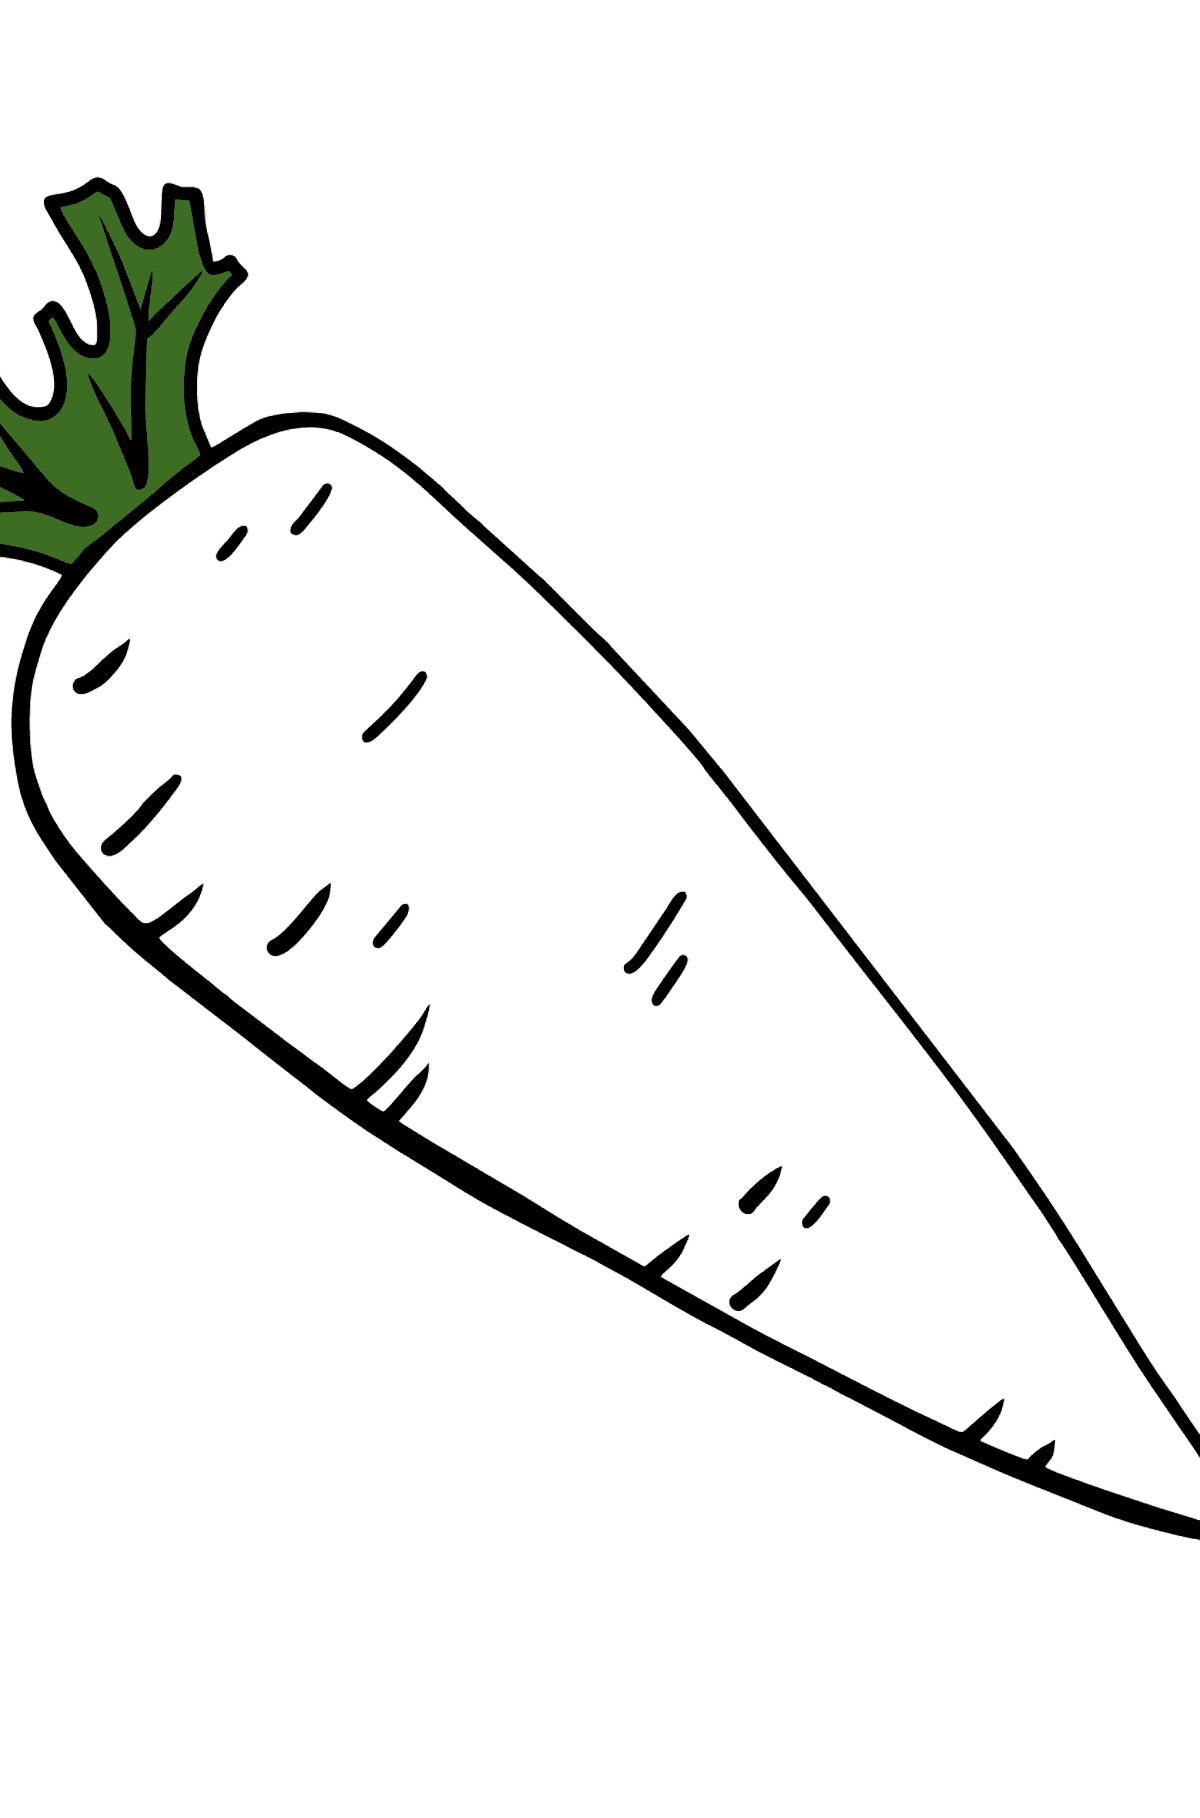 Carrot coloring page - Coloring Pages for Kids